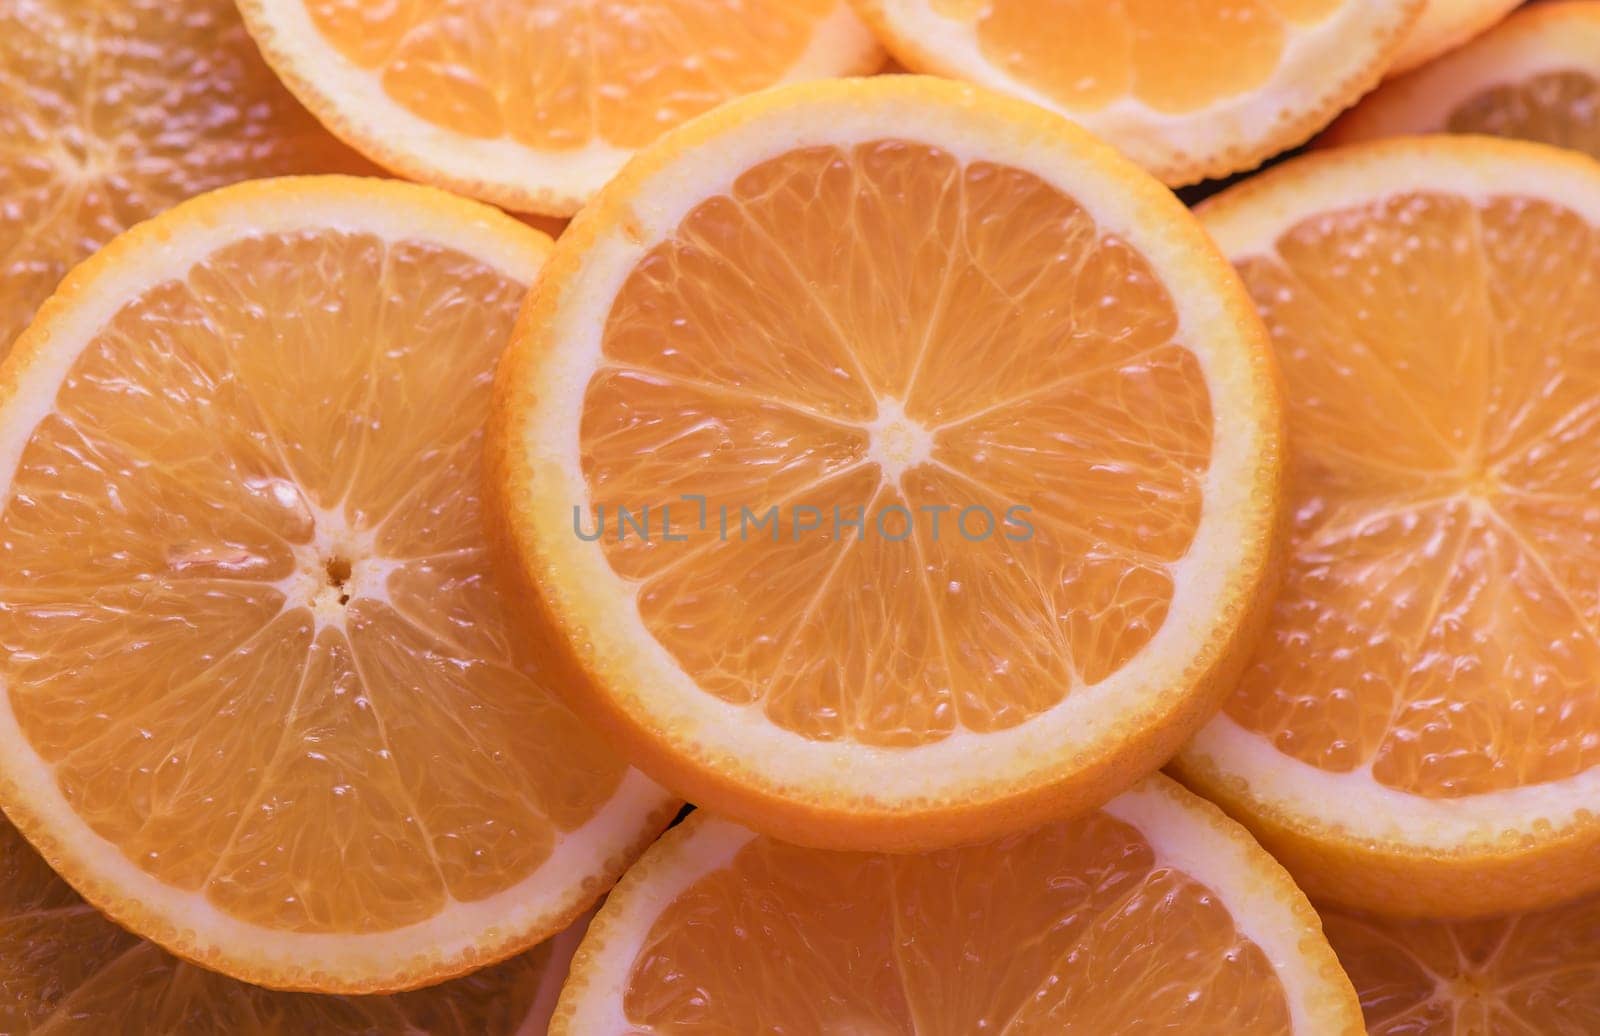 oranges cut into slices and laid out on the table as a food background 4